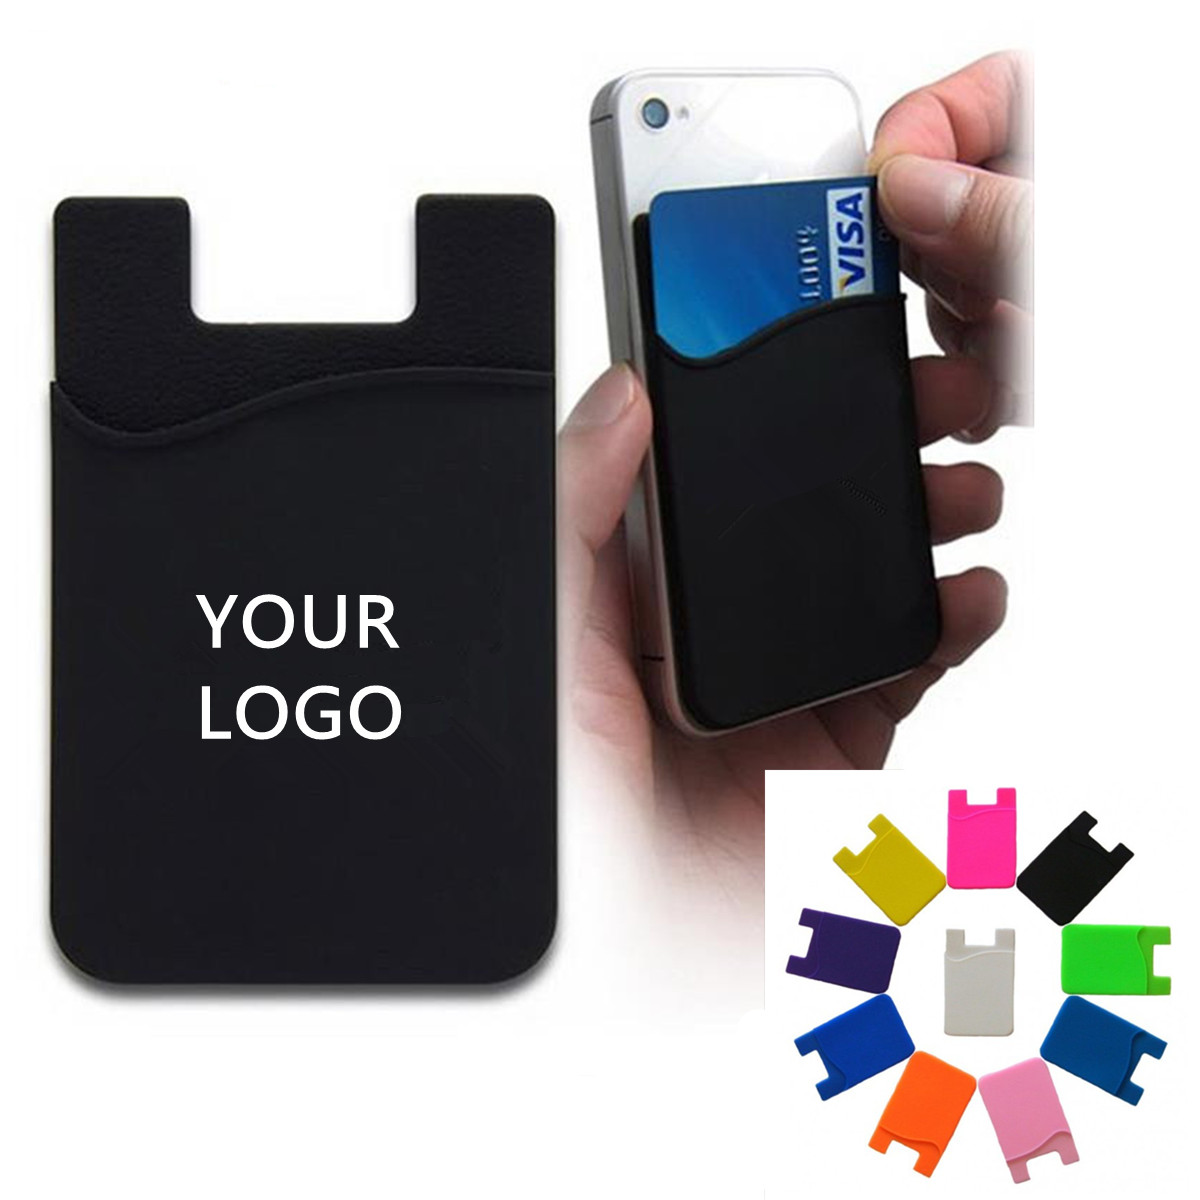 3M adhesive mobile phone wallet/ silicone card holder